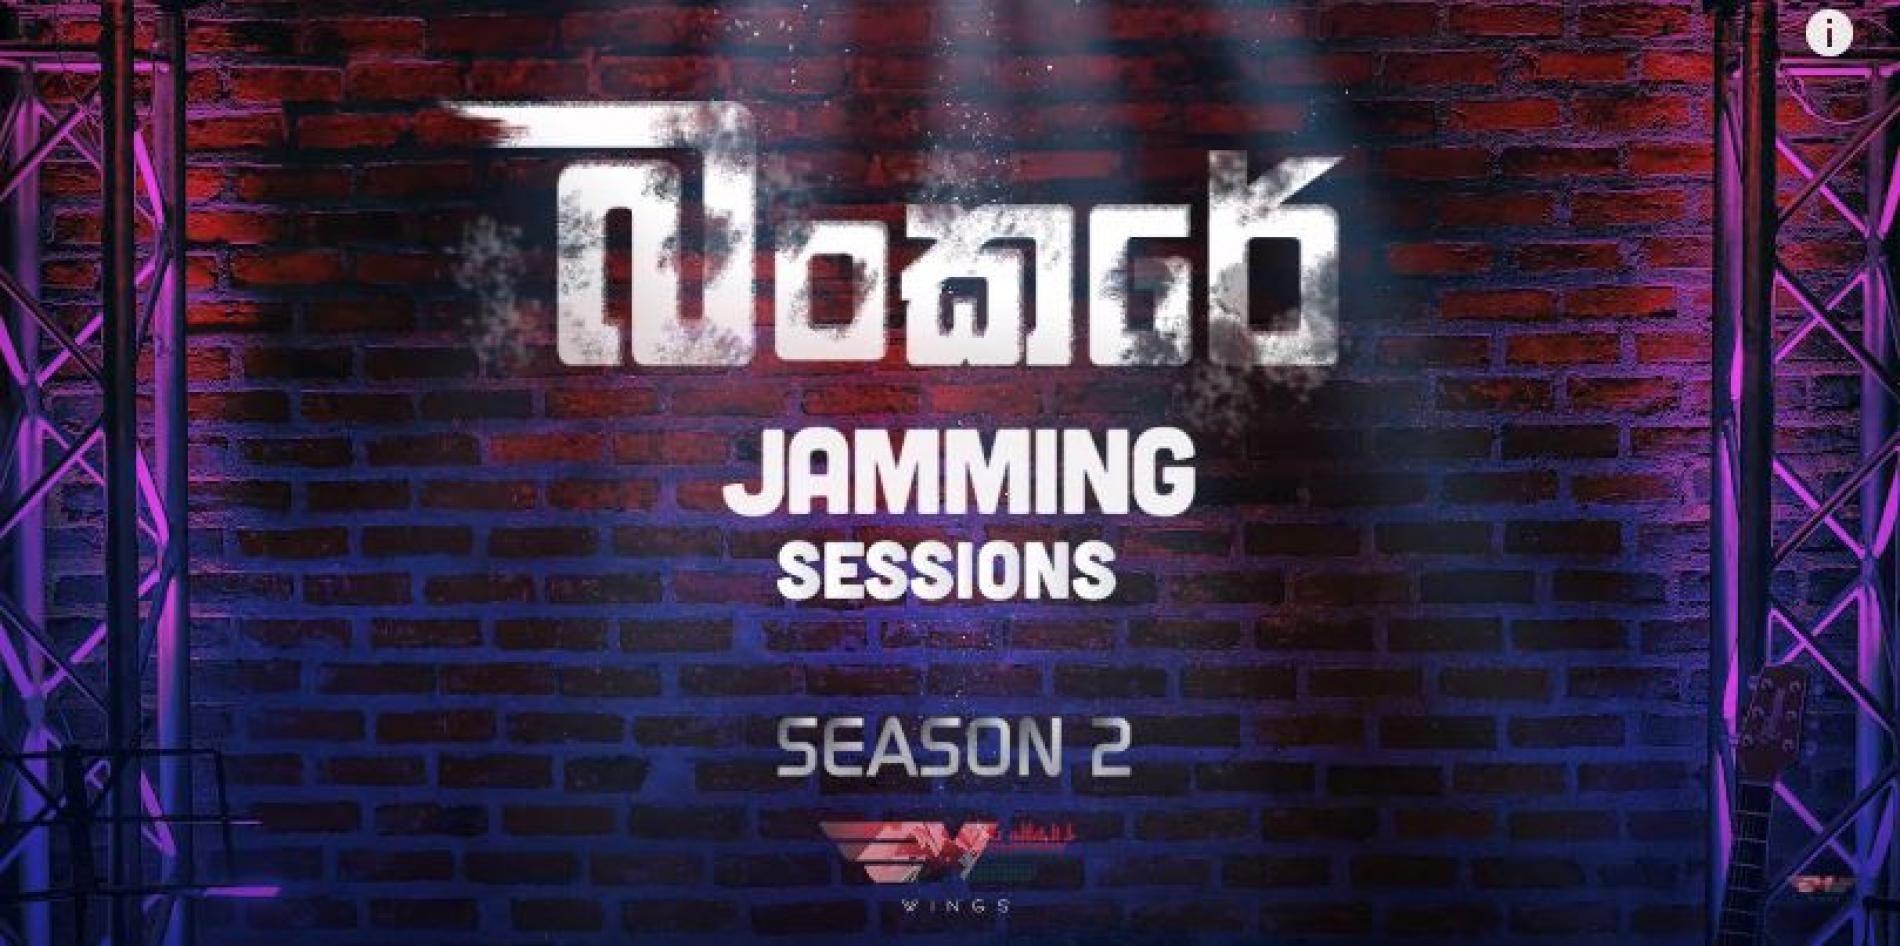 New Music : Math Wee (මත් වී) | Lanthra Perera (Doctor) ft WINGS | Bunker Sessions (Season 2) | Ep-02 (Live)